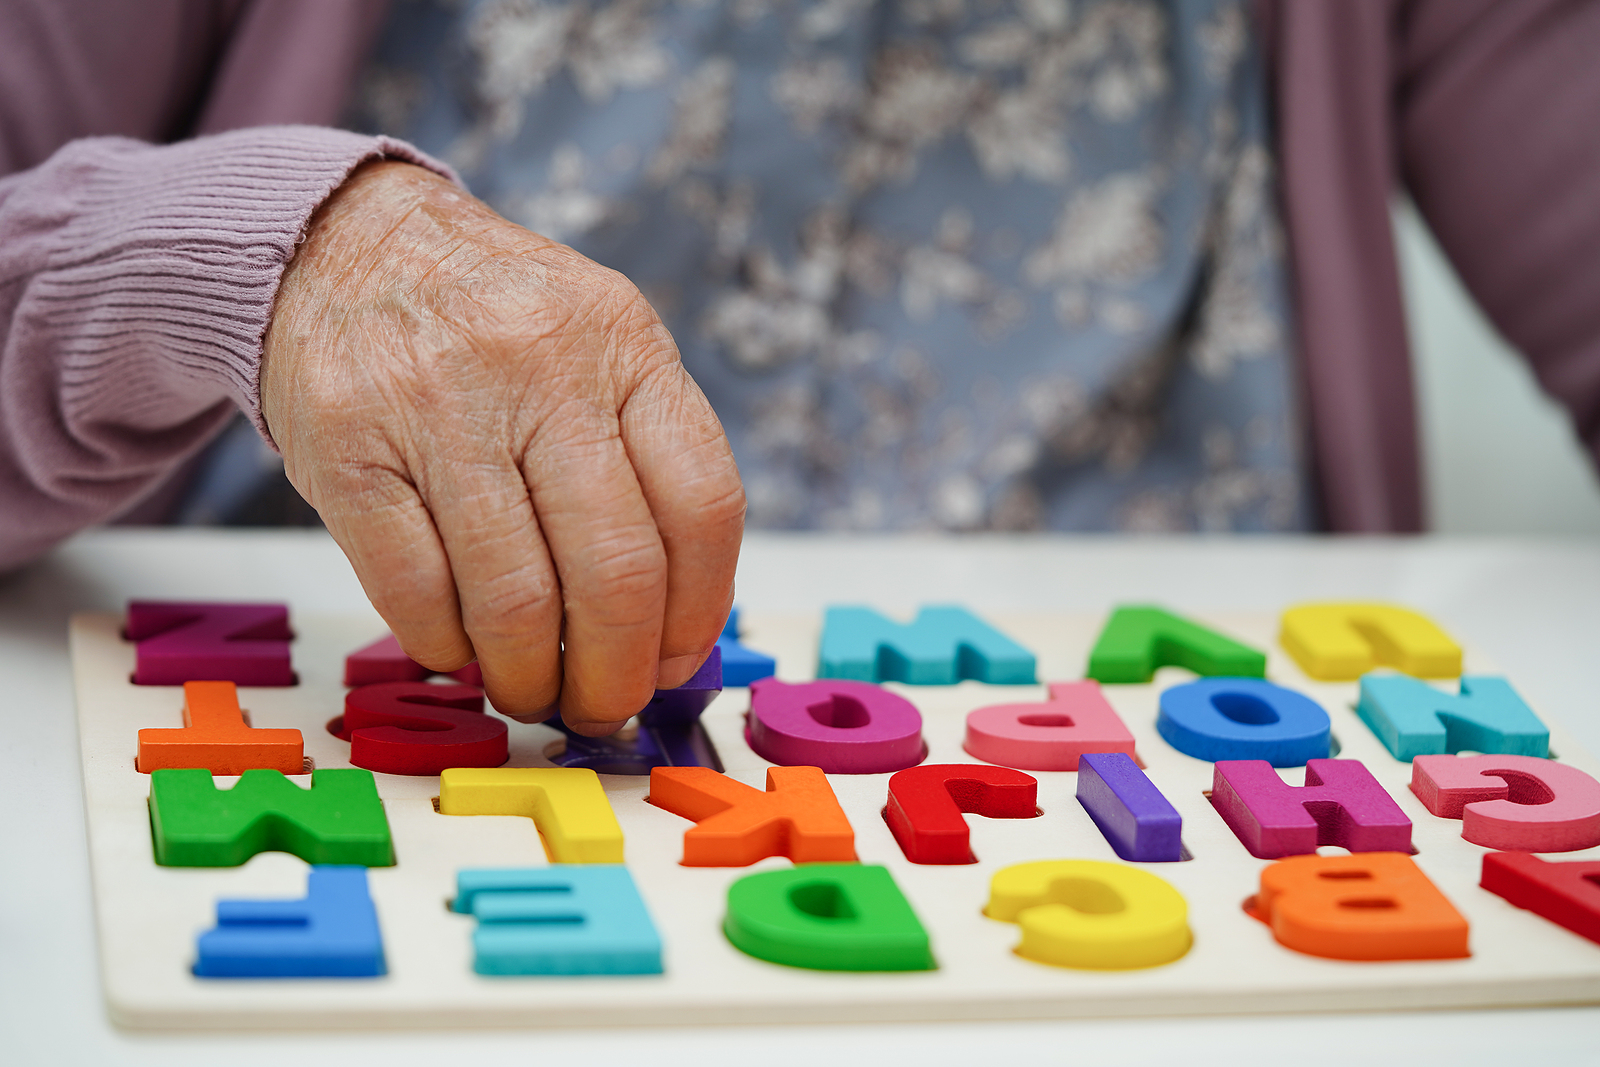 Is There A Link Between Hearing Loss Treatment And Dementia?